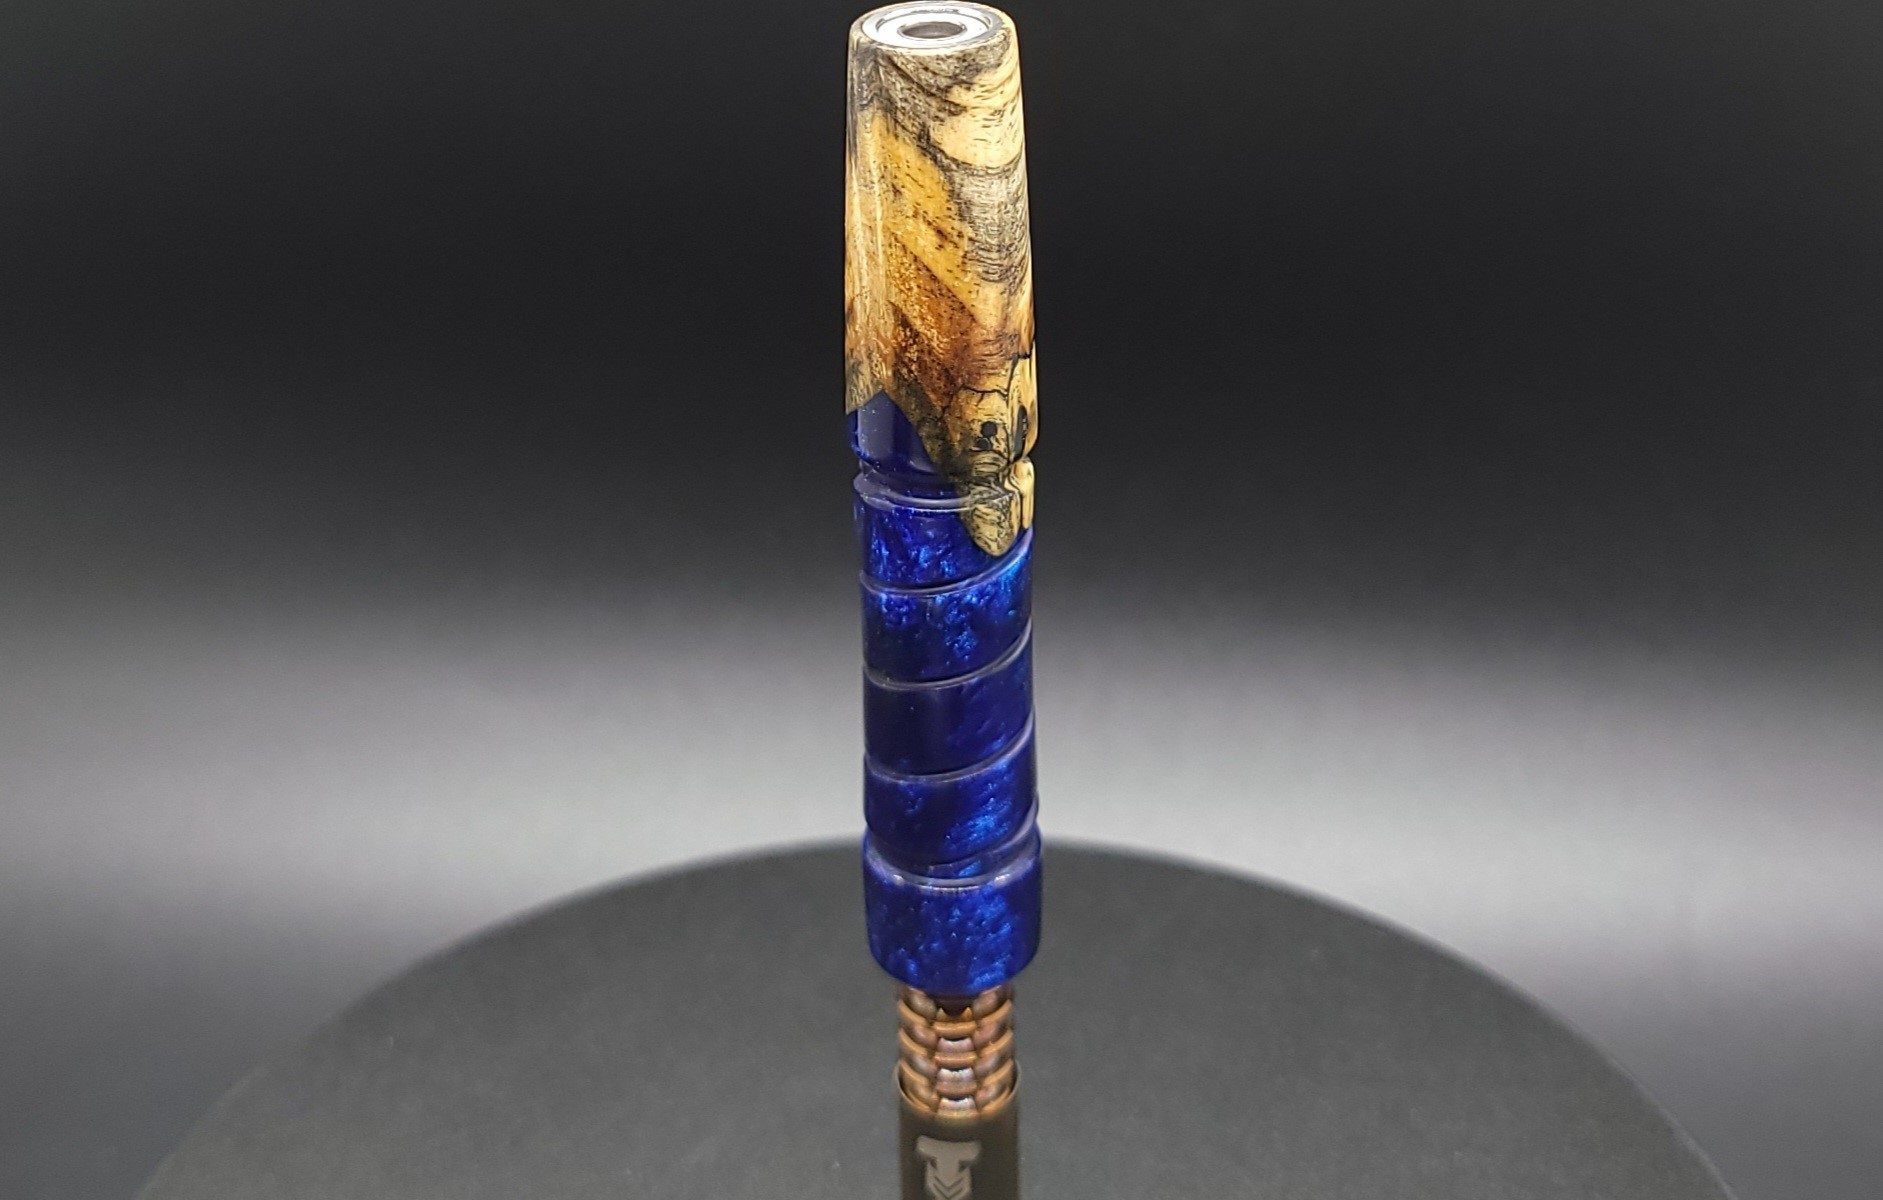 This image portrays Twisted Stems Series-Burl Hybrid-XL Dynavap Stem by Dovetail Woodwork.